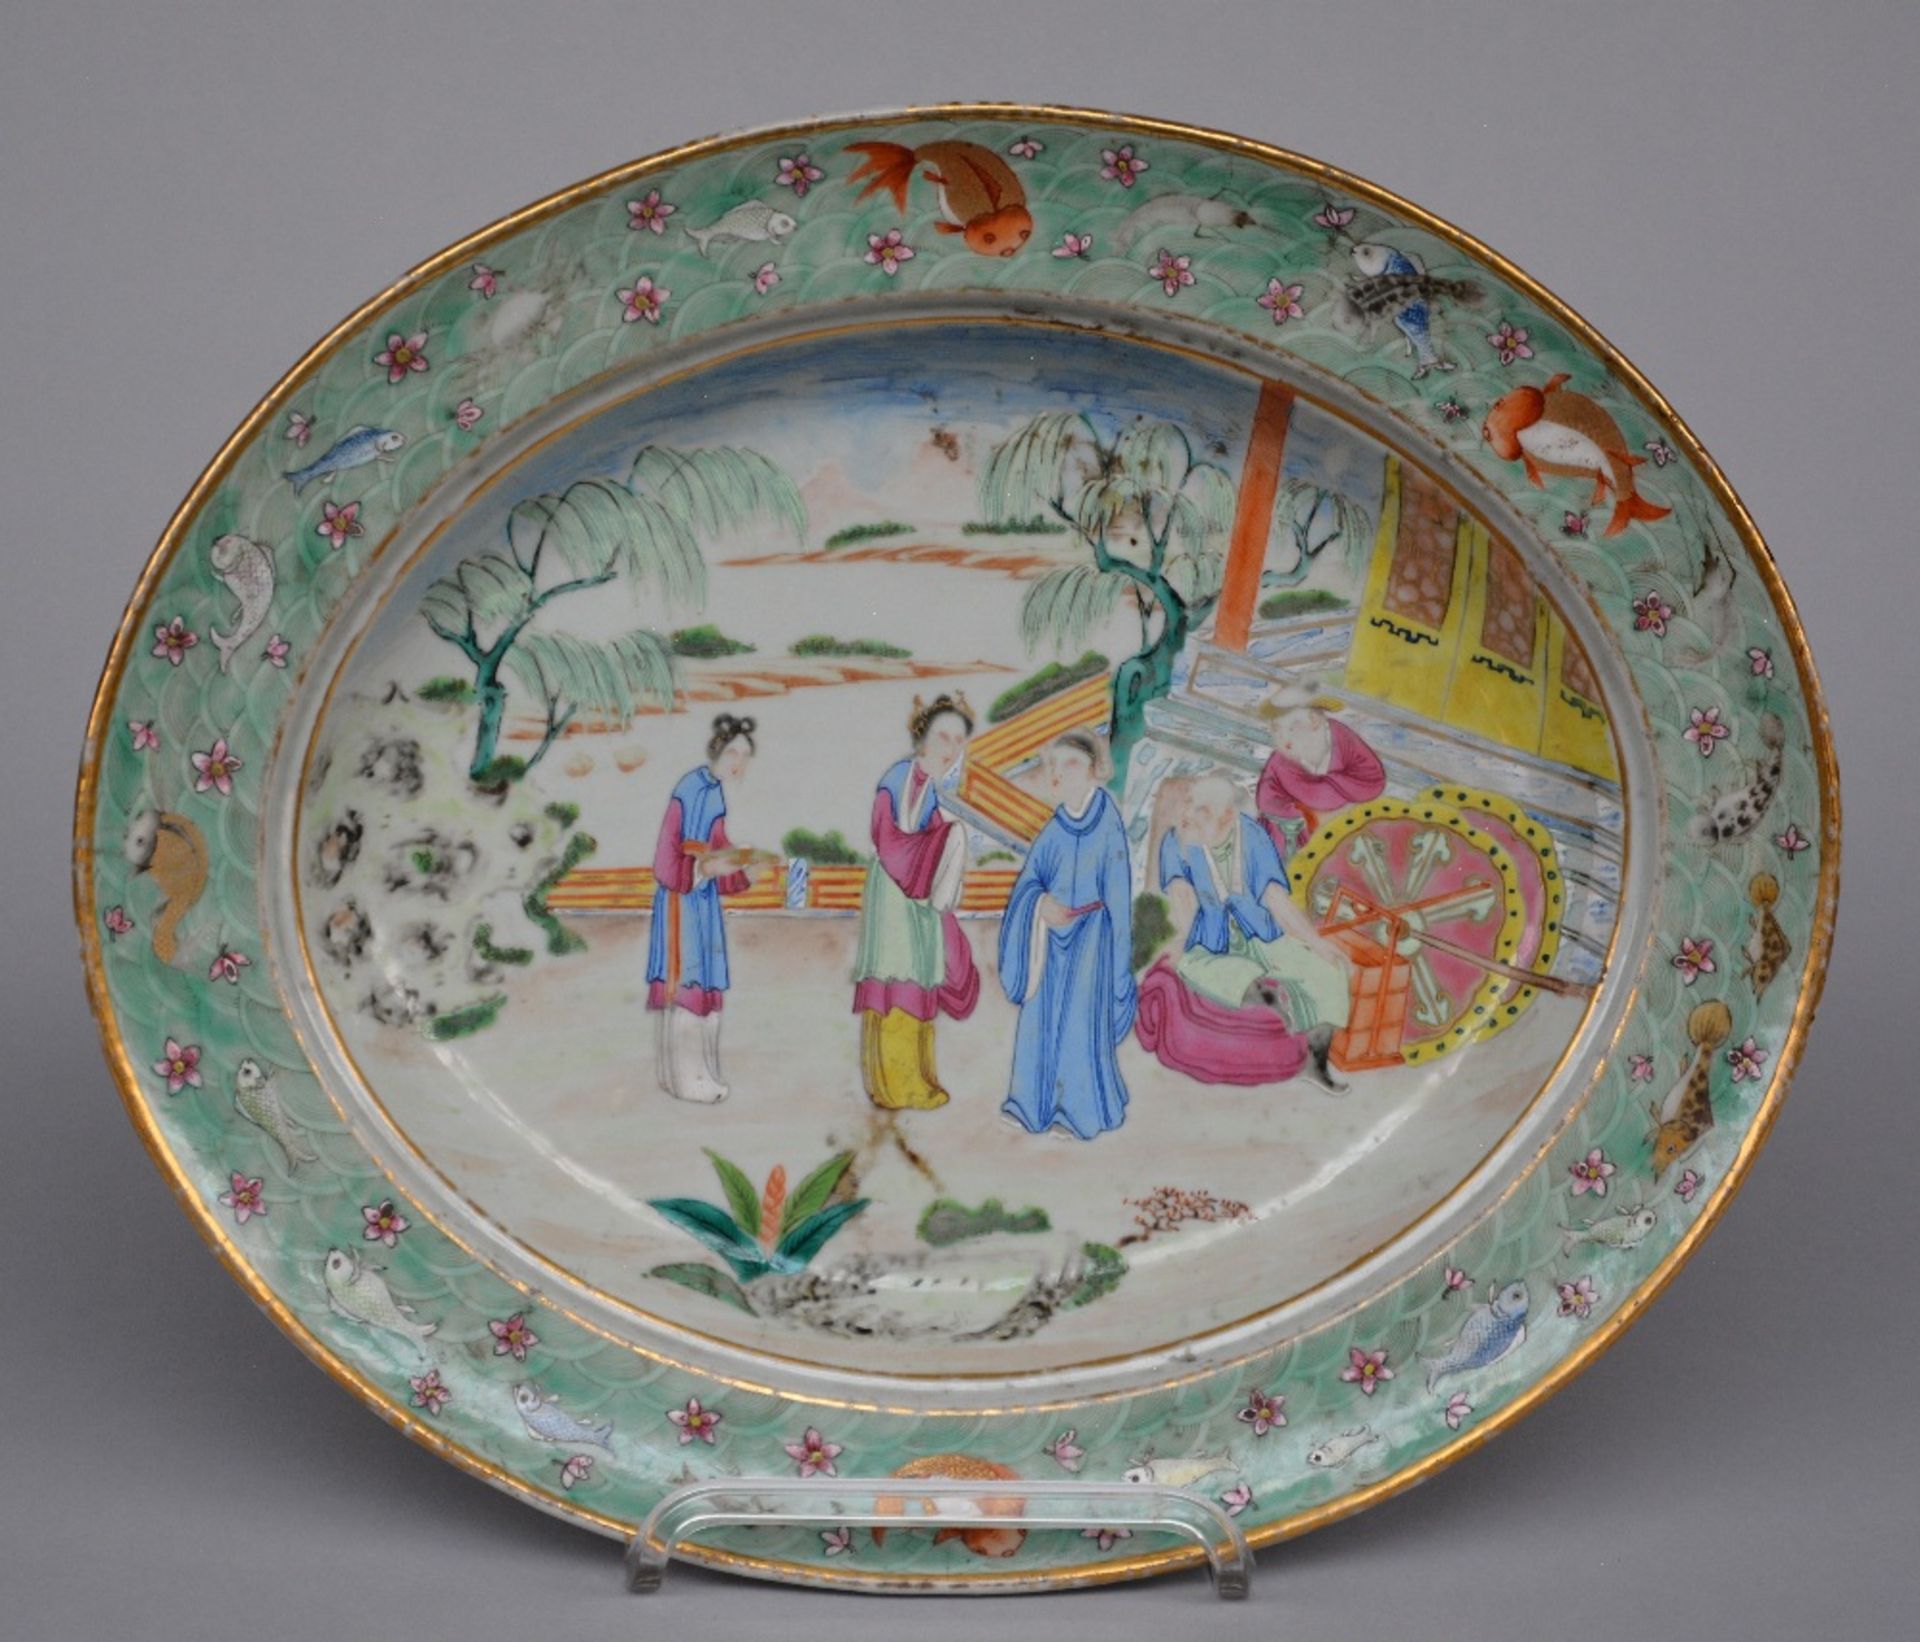 An exceptional Chinese oval dish, famille rose, decorated with a genre scene and fish, 18thC, H